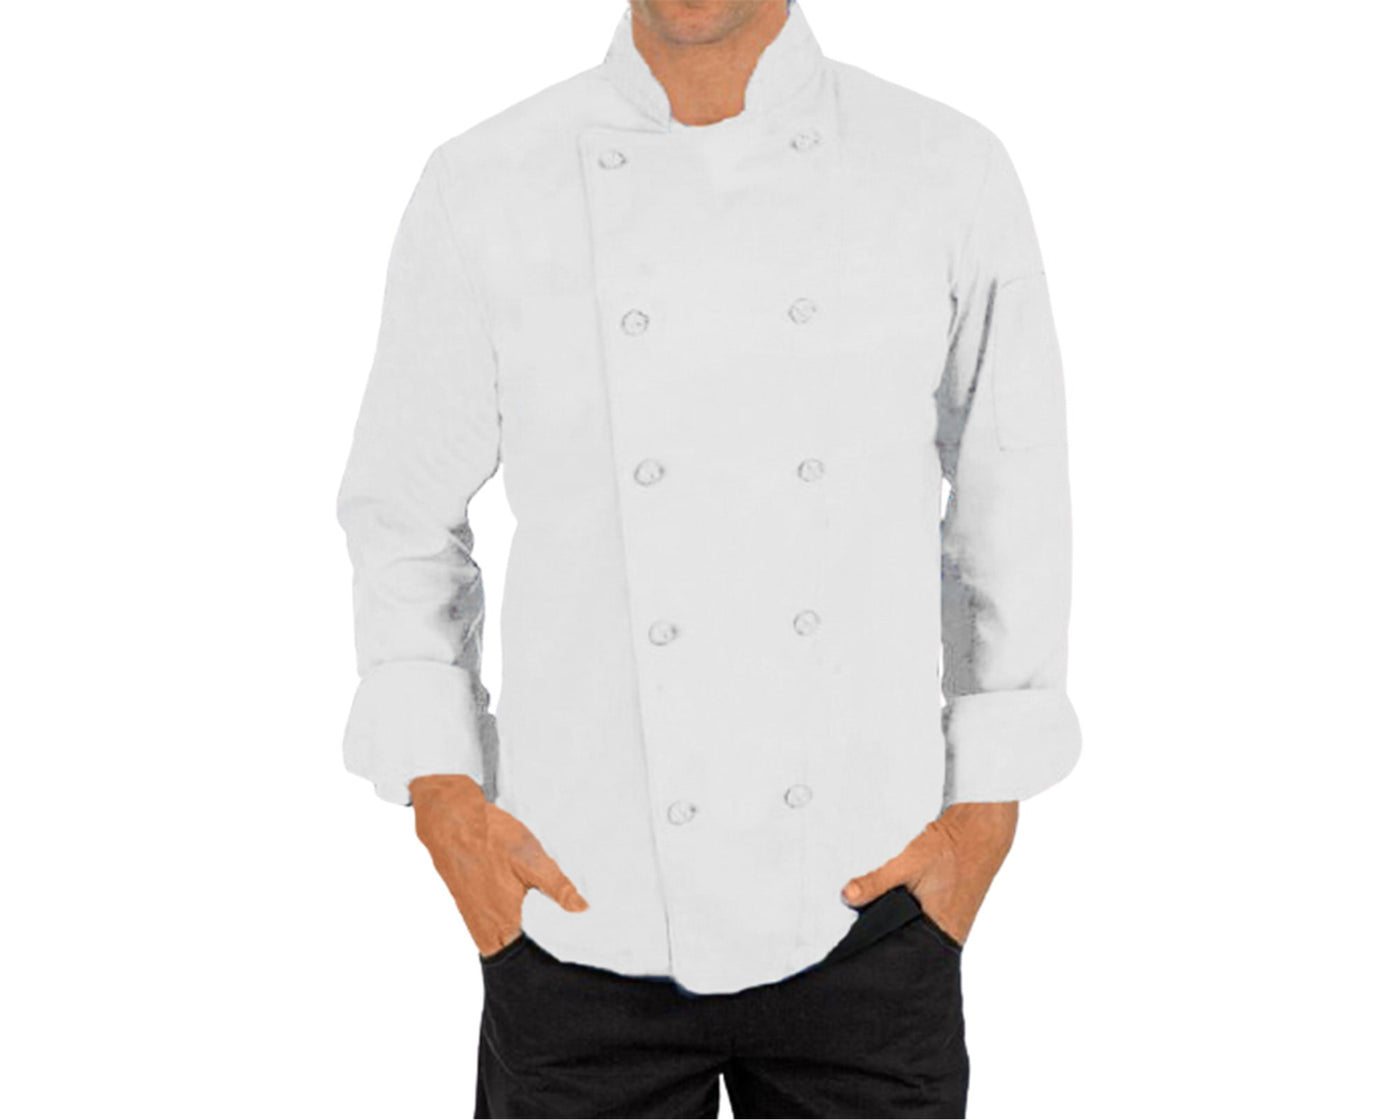 Person wearing White chef coat with solid button